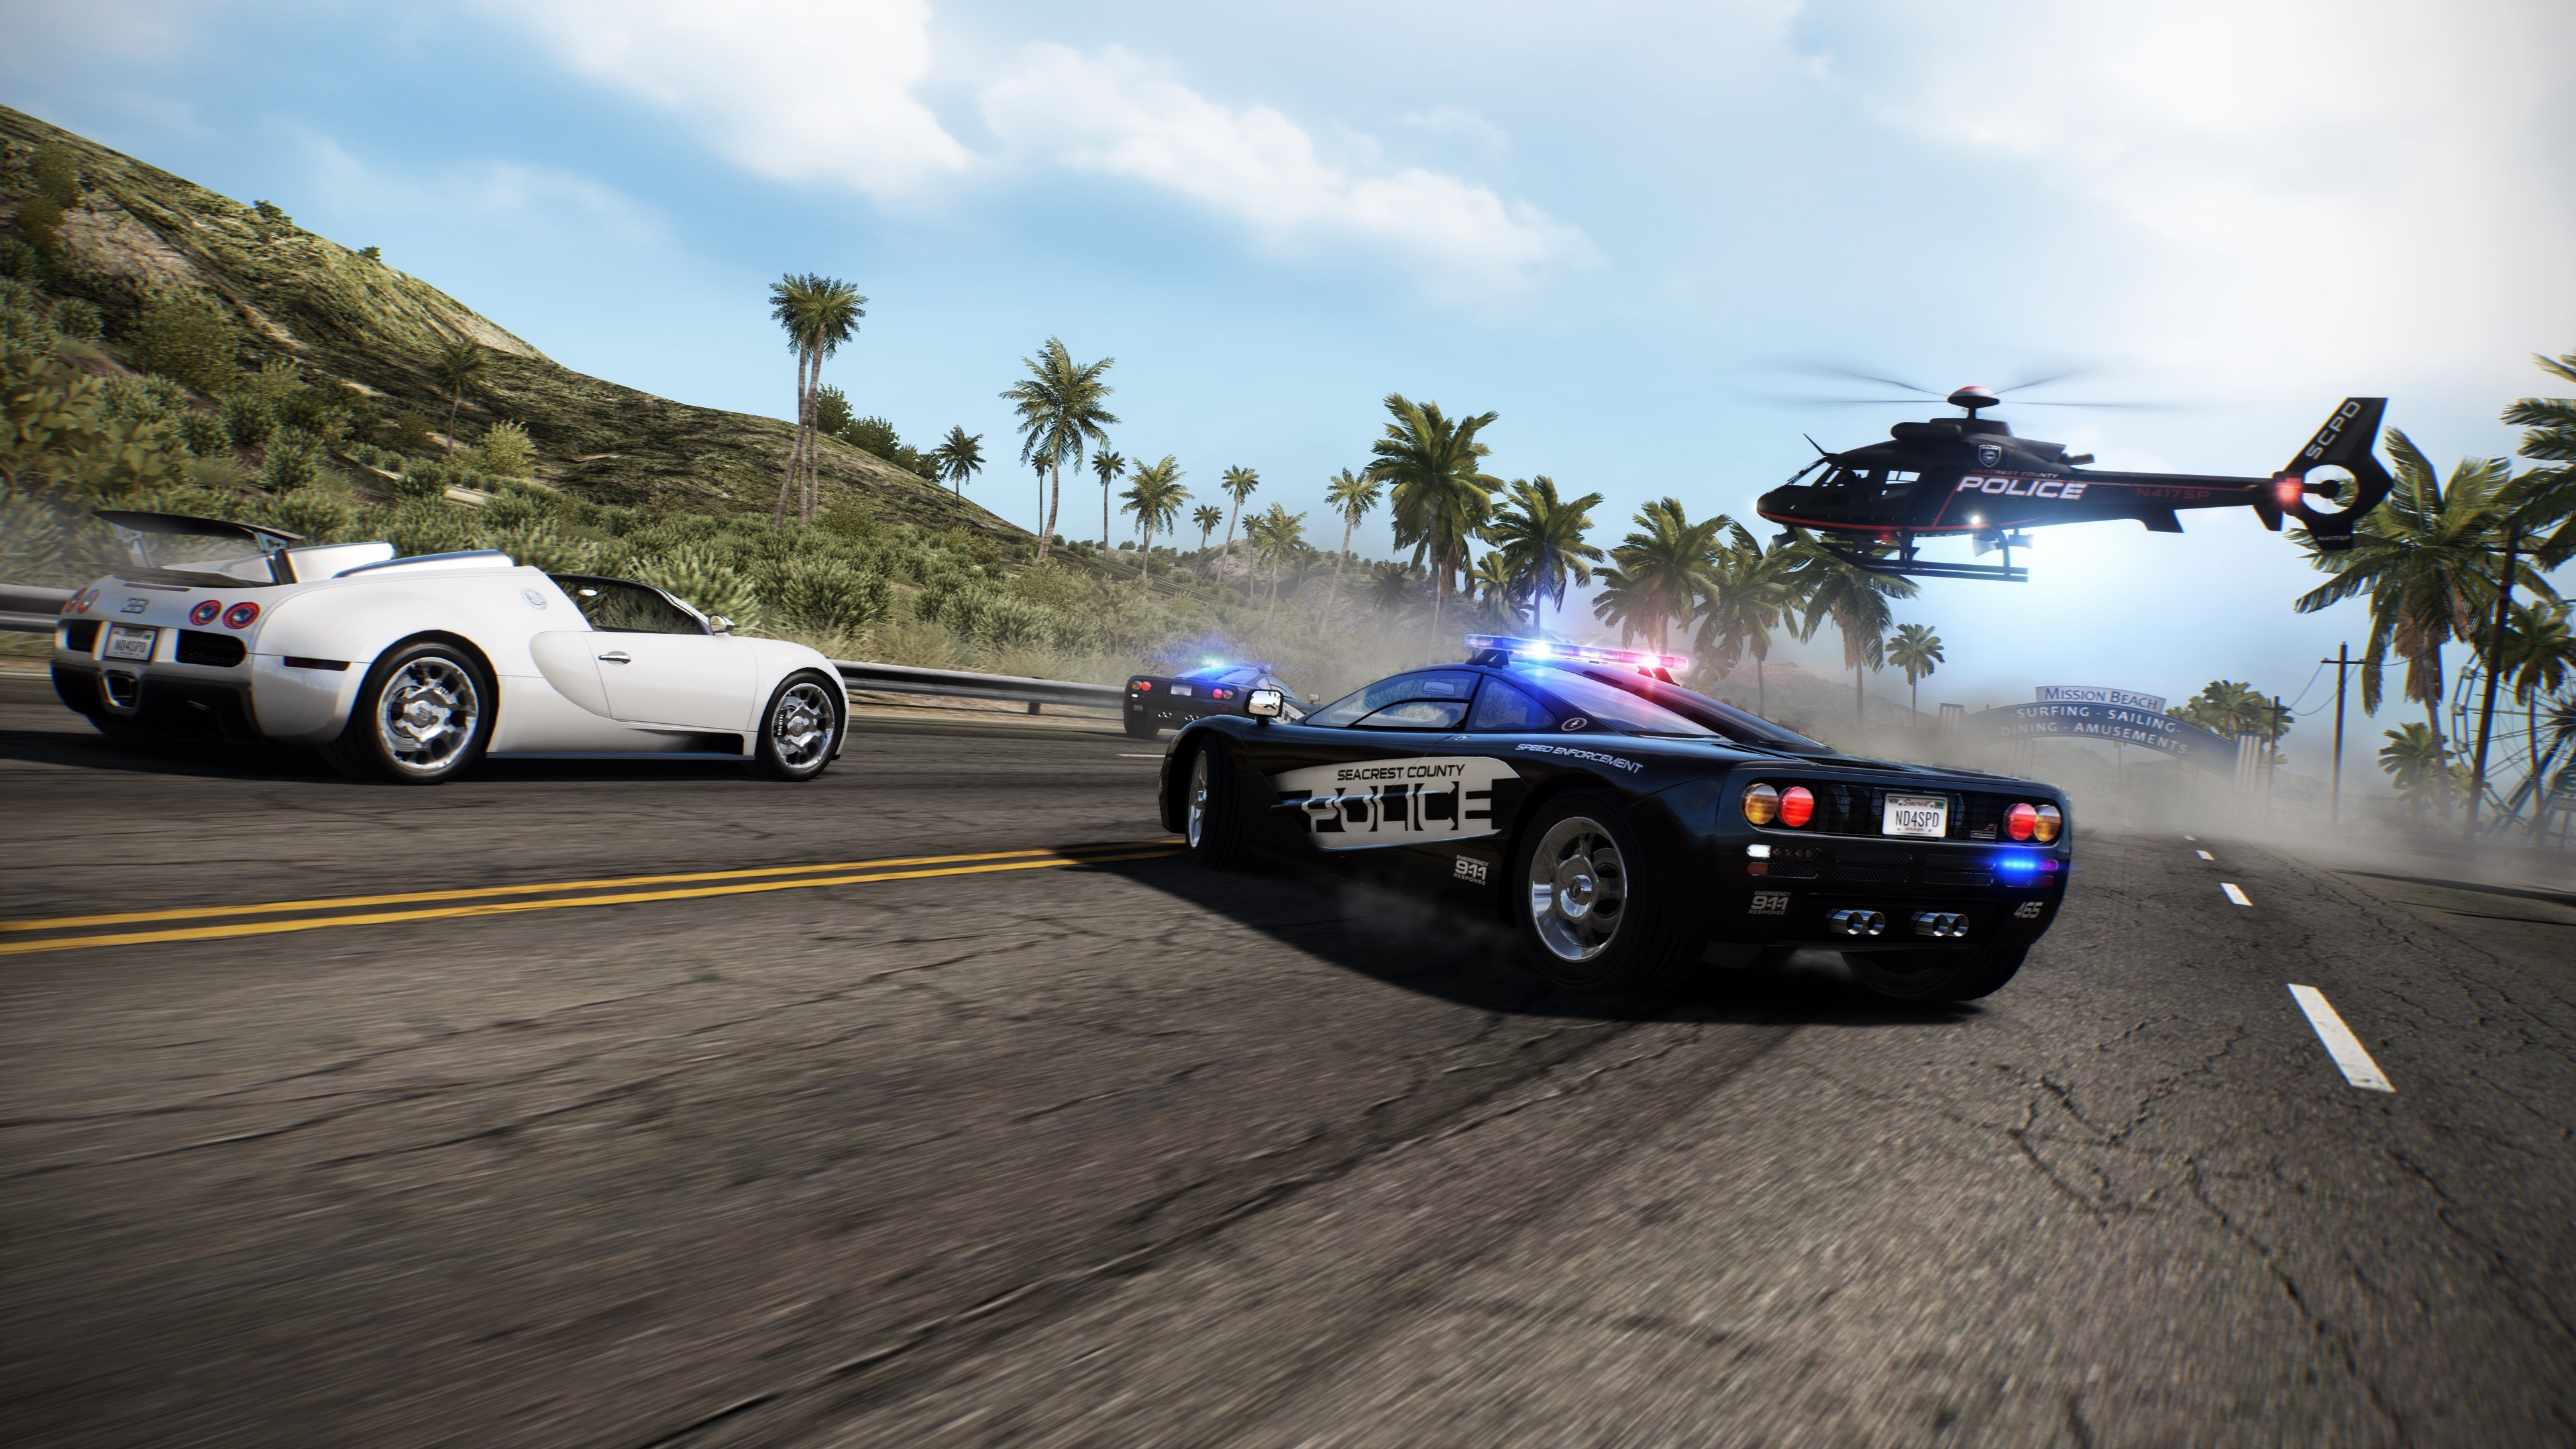 Hot pursuit nintendo. Need for Speed hot Pursuit ремастер. Need for Speed hot Pursuit Remastered ps4. Need for Speed hot Pursuit Remastered 2020. Need for Speed hot Pursuit ps4.